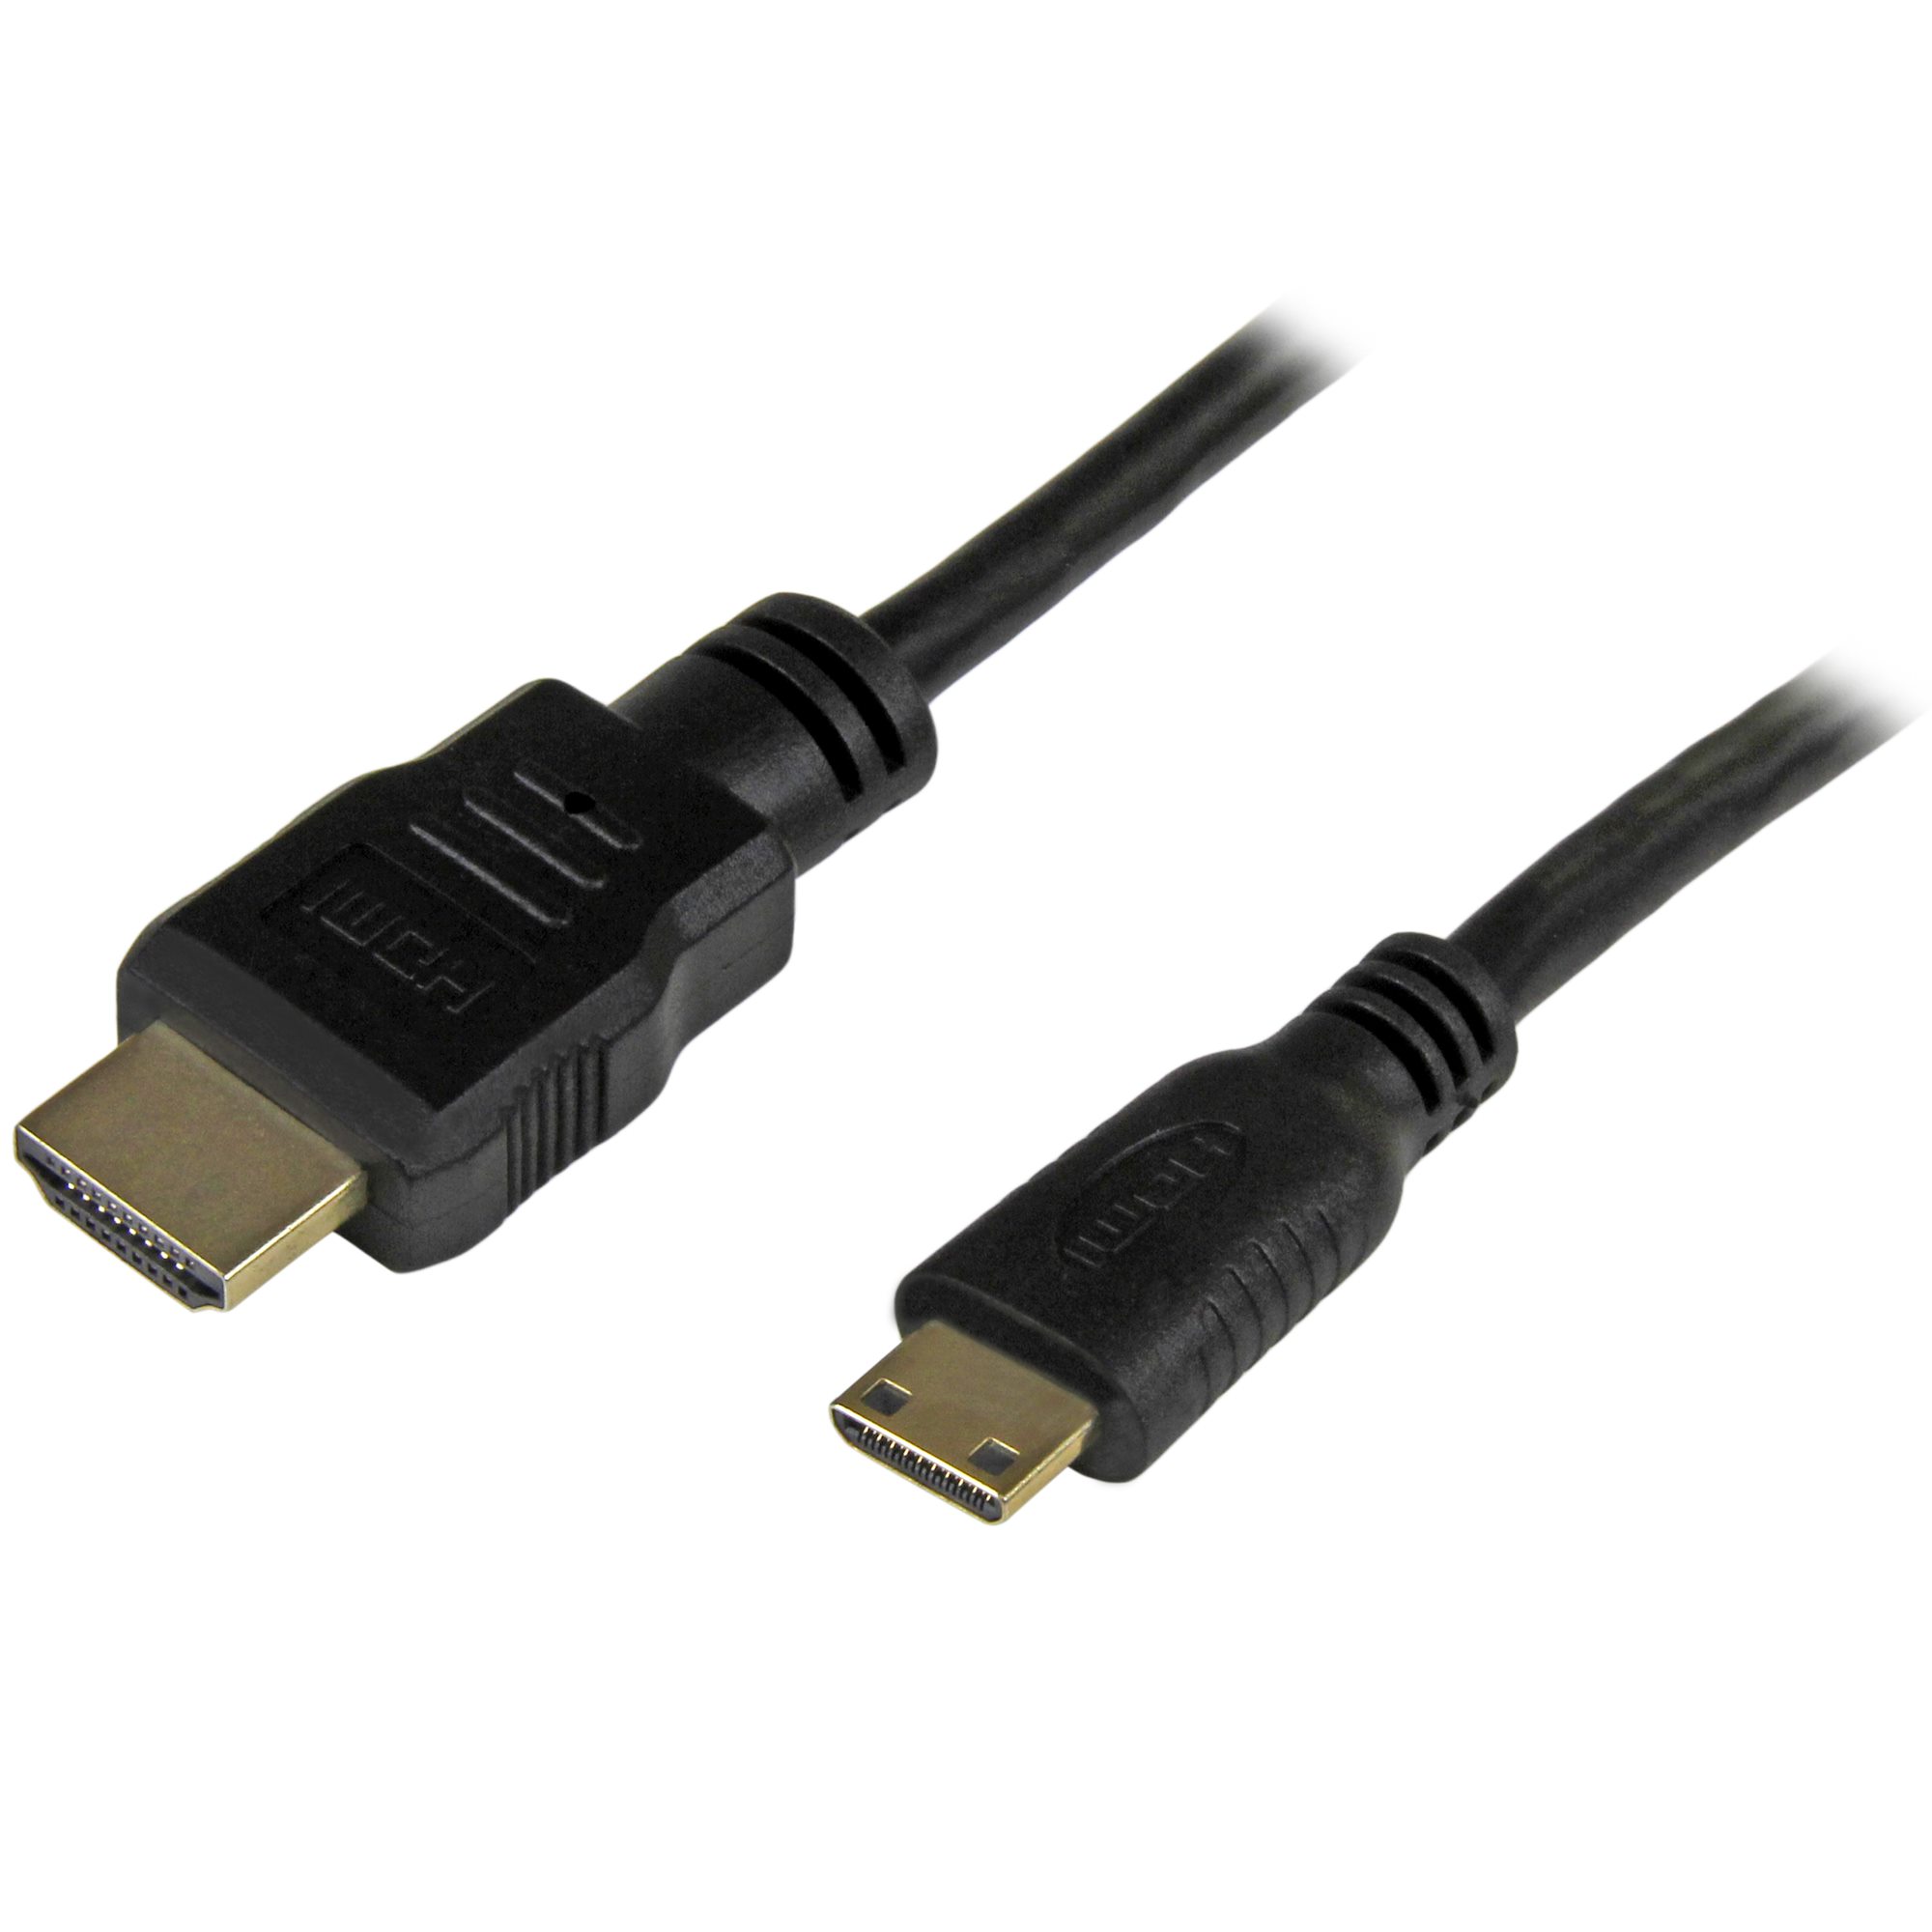 Mini HDMI to HDMI Cable Adapter 4K HDMI® Cables & HDMI Adapters | StarTech.com